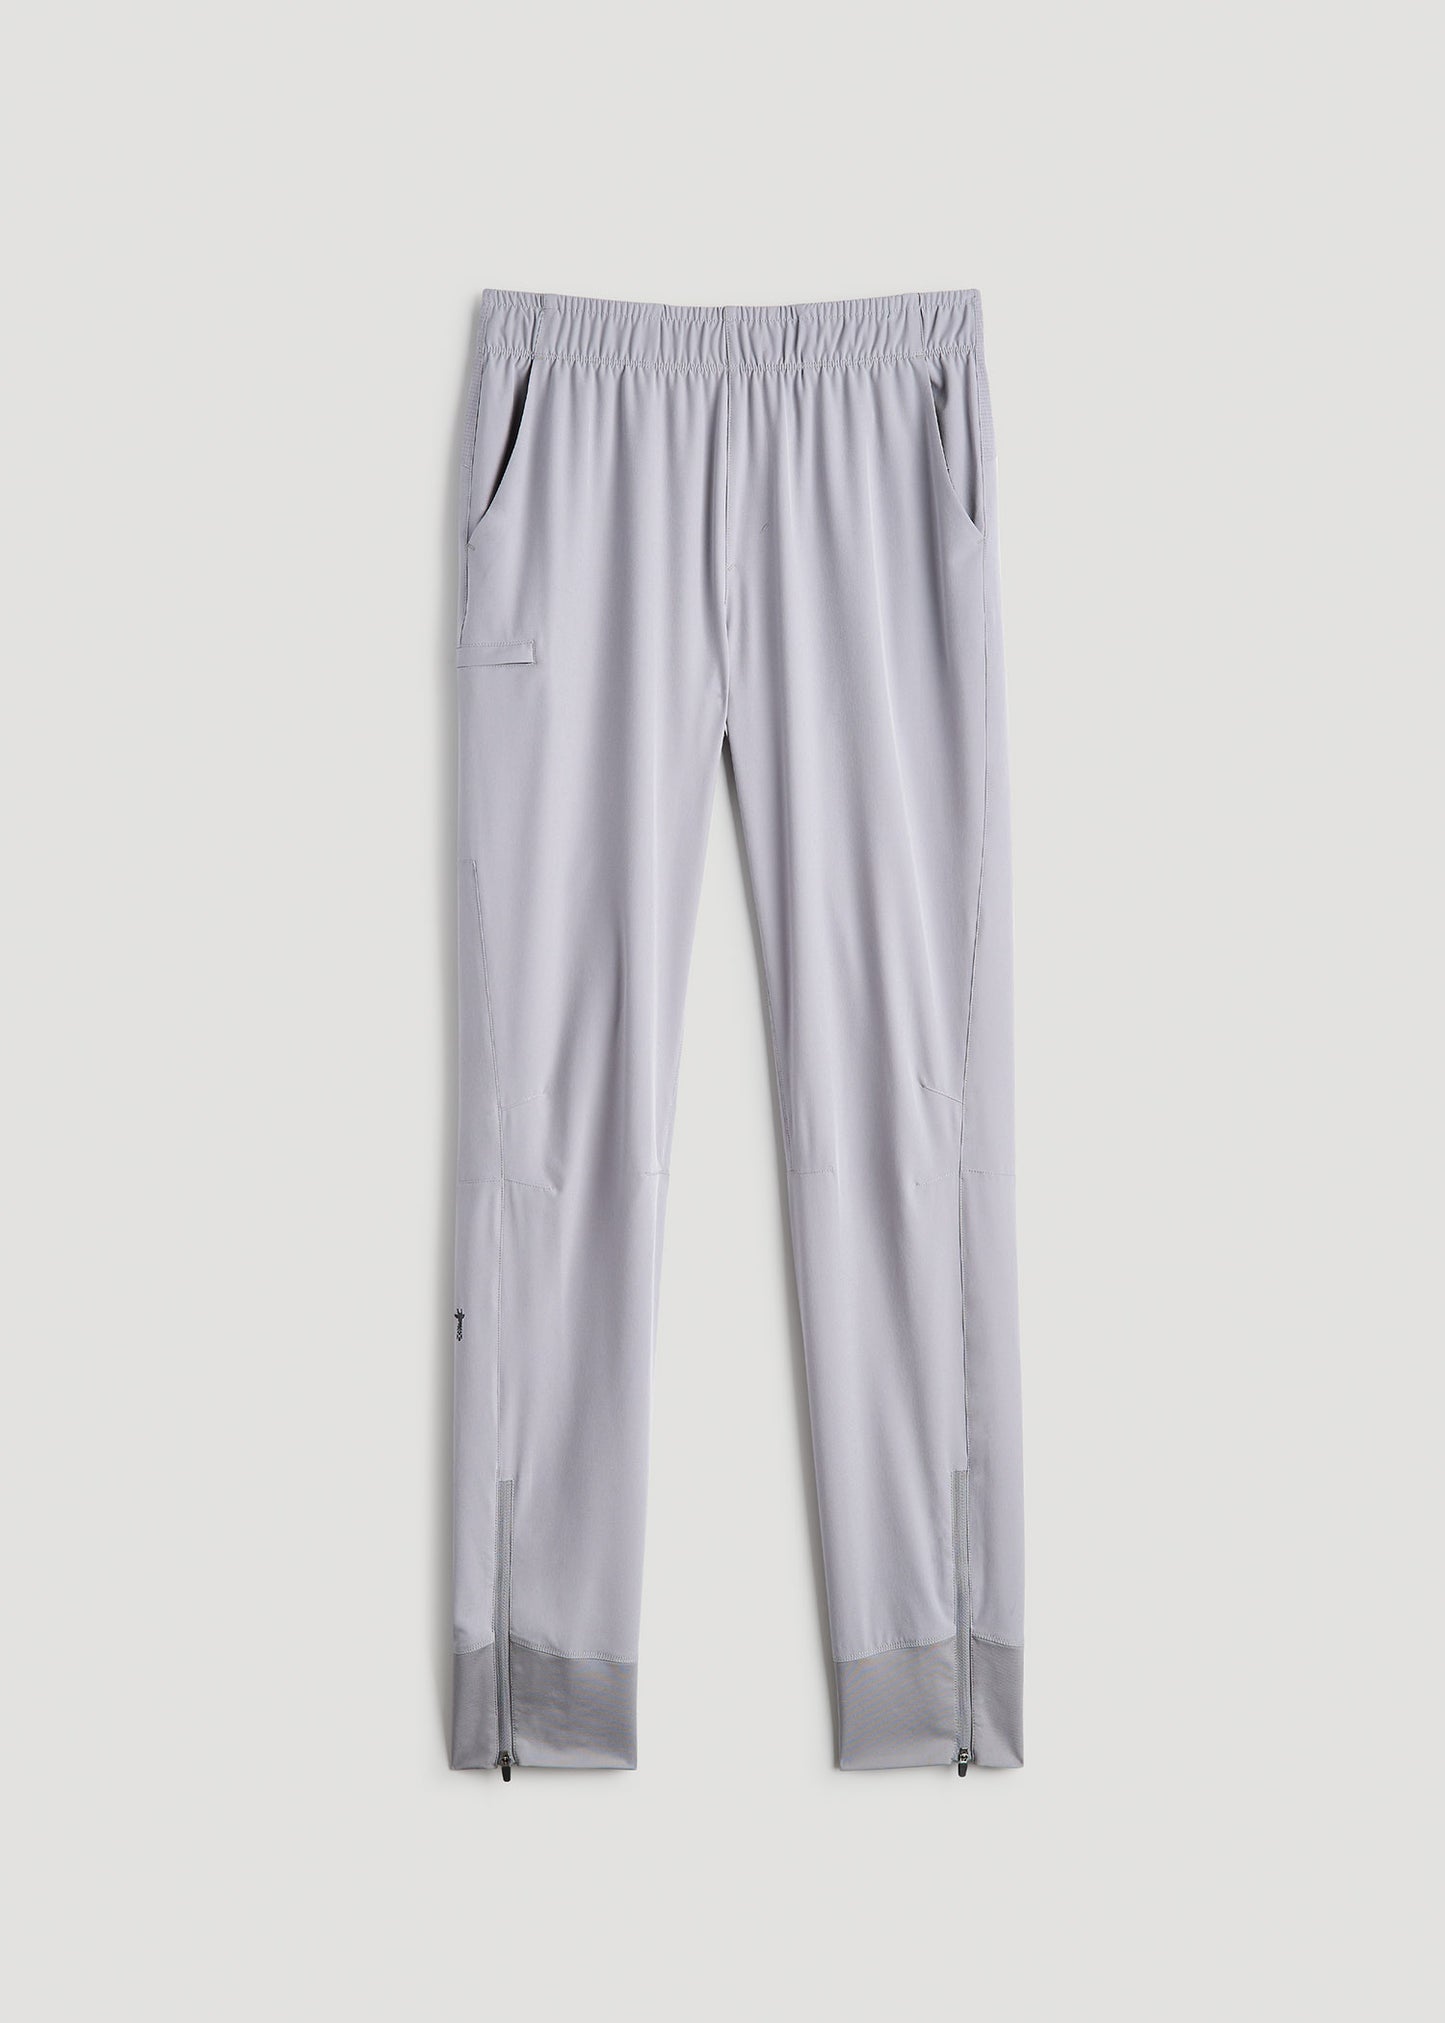 Featherweight Perforated Training Jogger for Tall Men in Light Grey